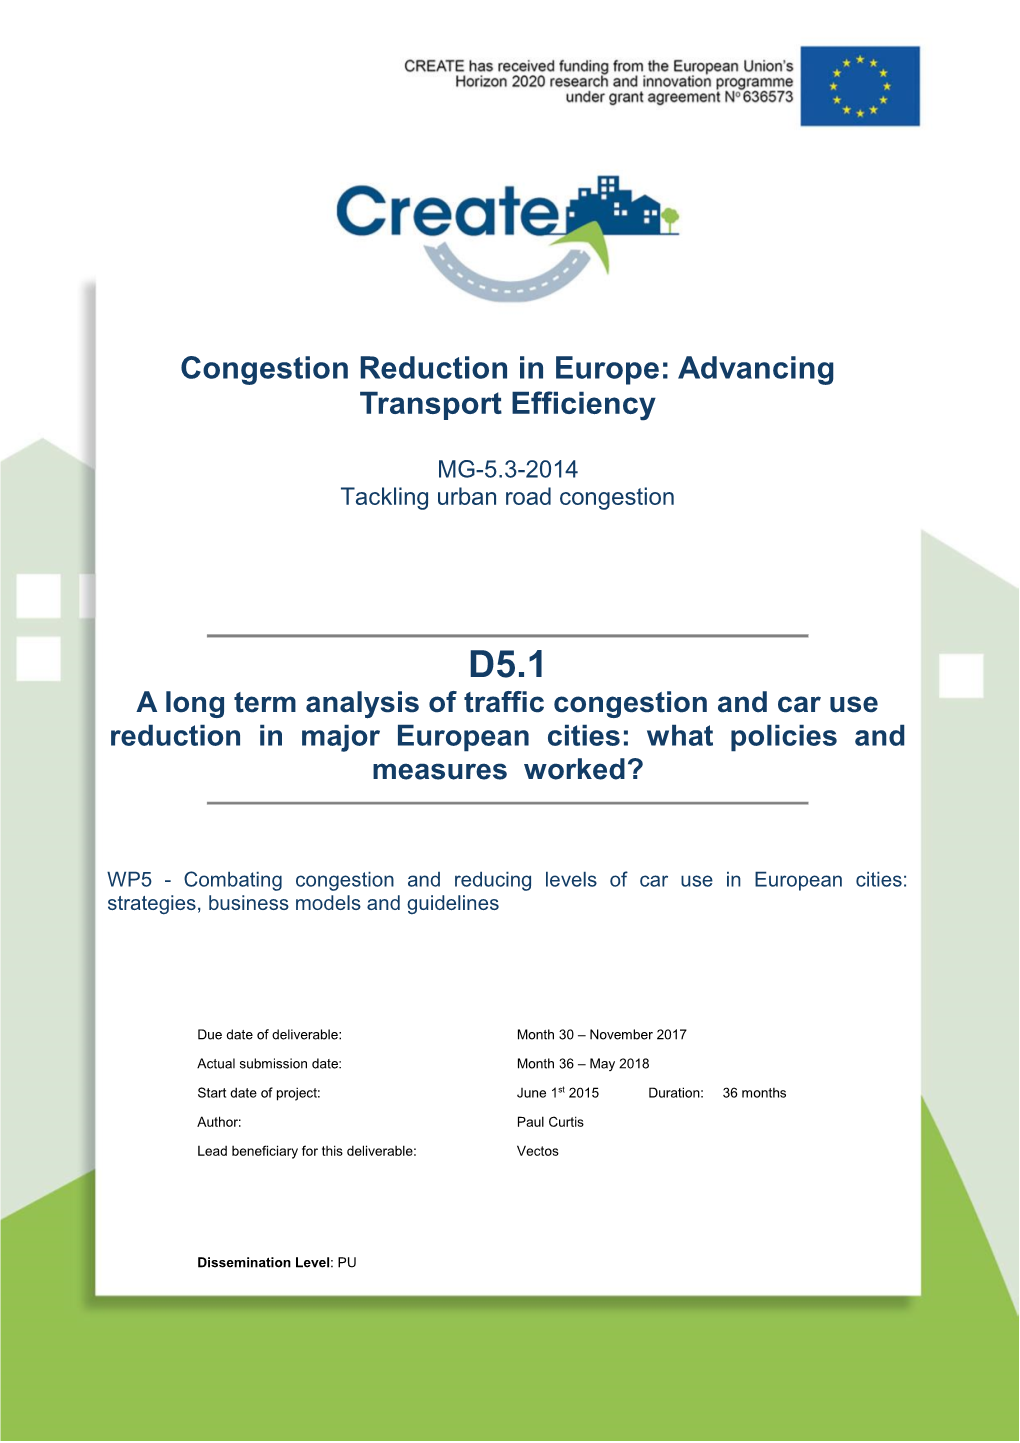 Congestion Reduction in Europe: Advancing Transport Efficiency